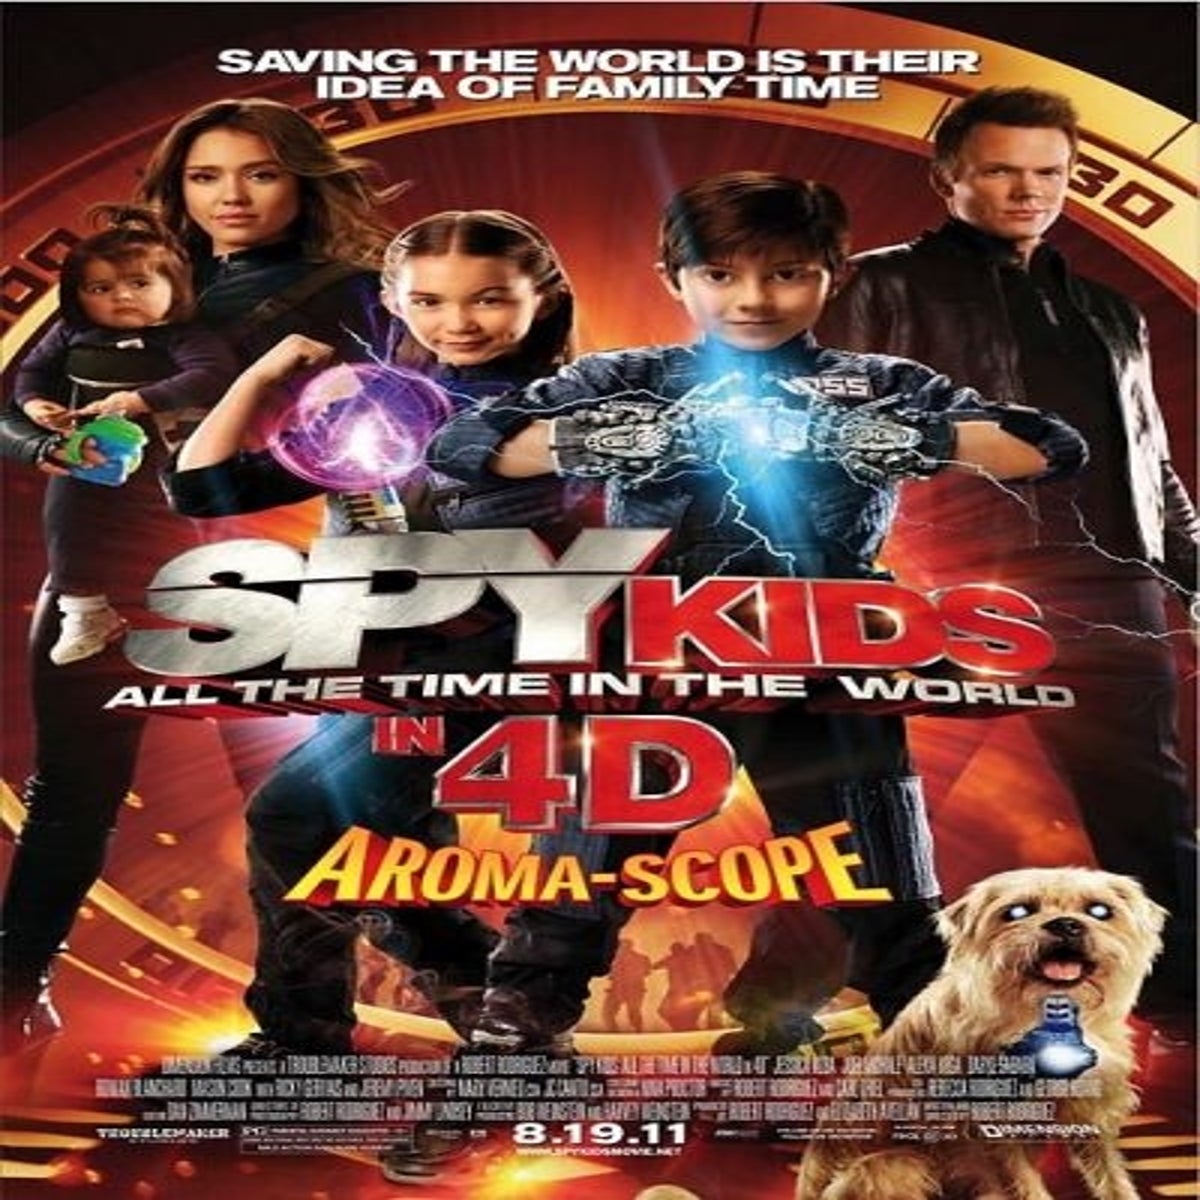 Spy Kids 4' will feature 4D 